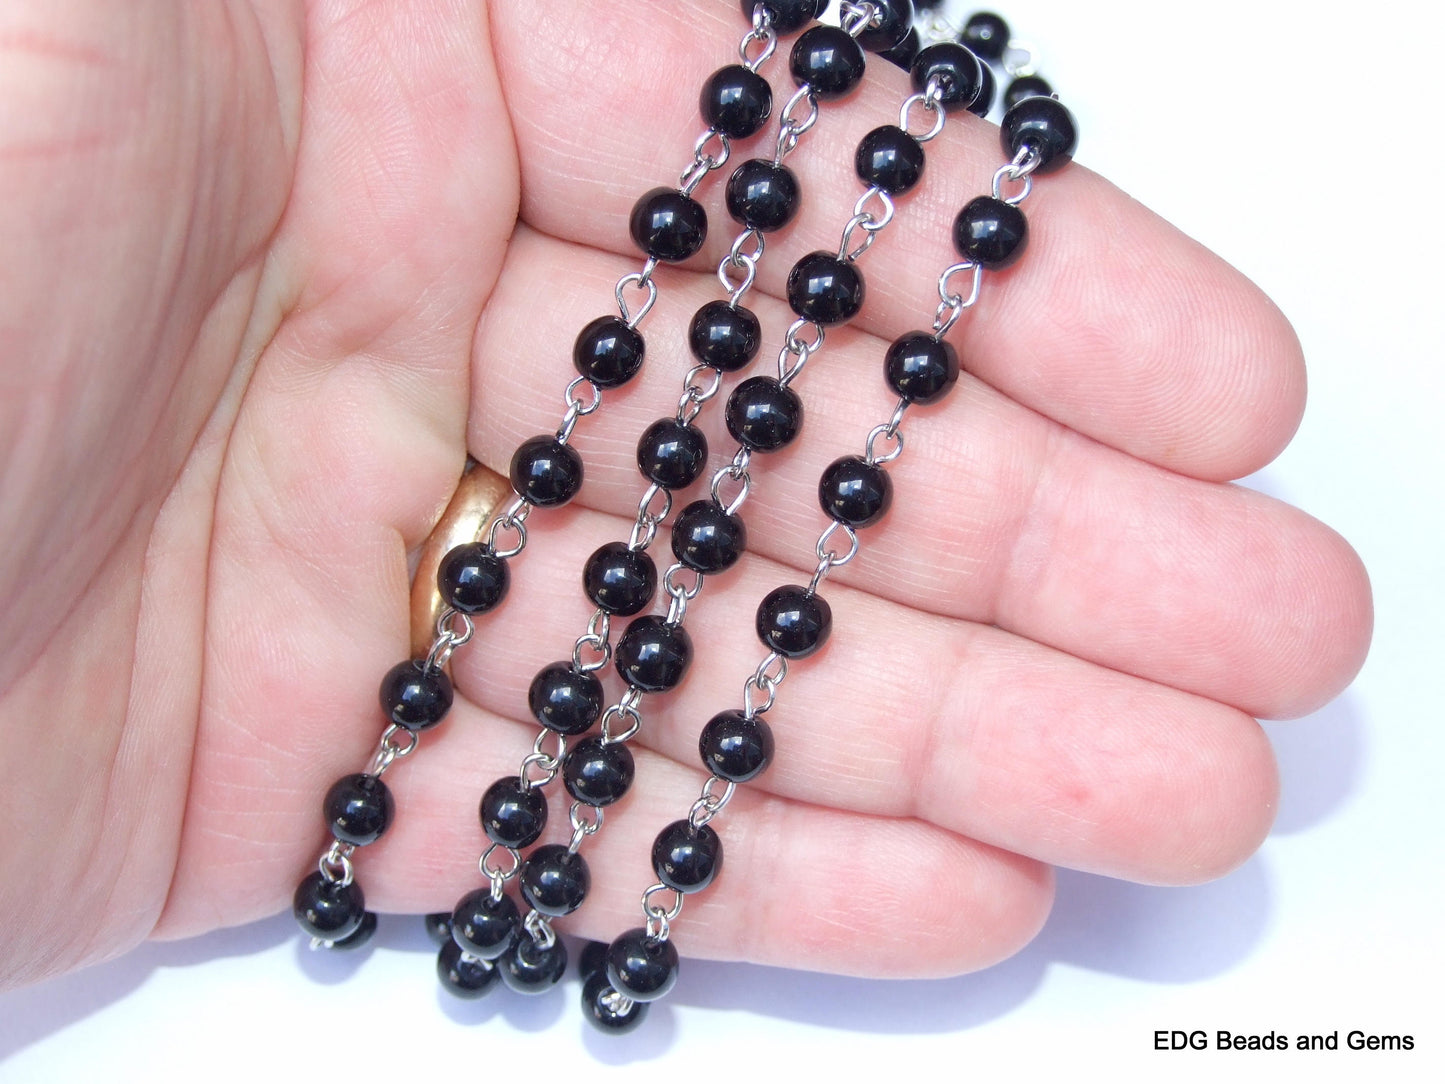 8mm Black Polished Pearl Rosary Chain, 1 Meter, Glass Beads, Beaded Chain, Body Chain Jewelry, Silver Chain, Necklace Chain, Belly Chain